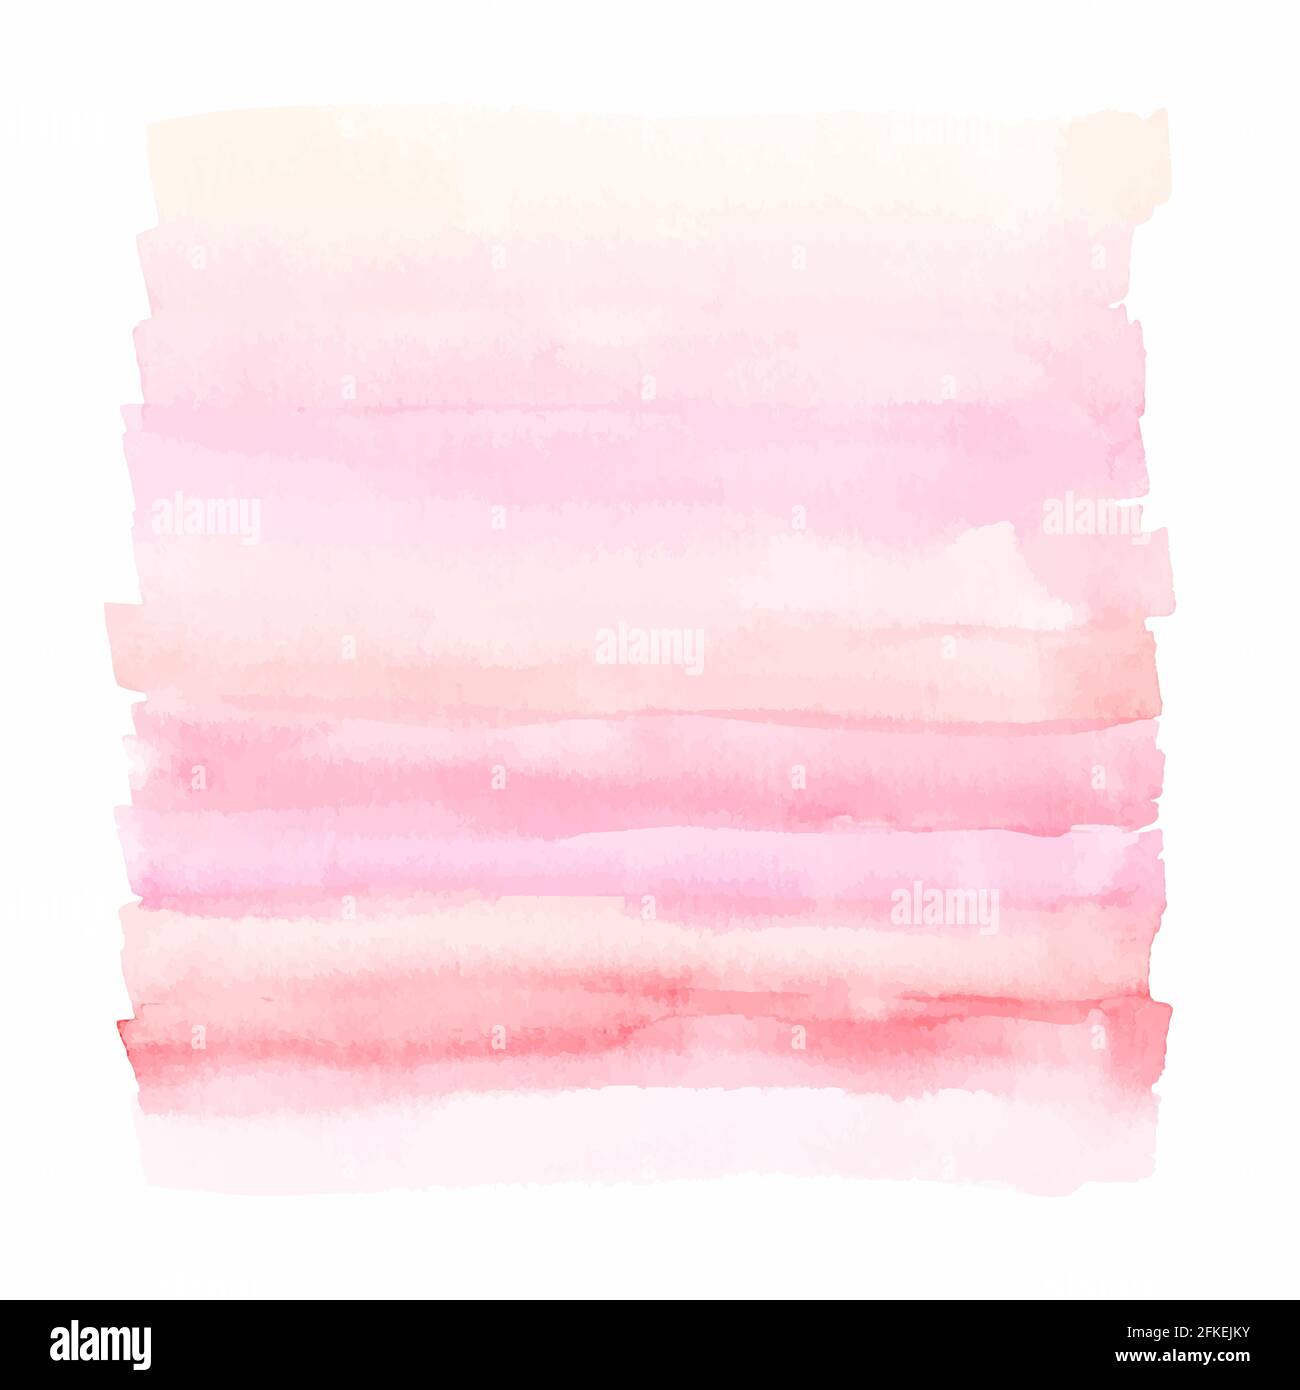 Light pink watercolor Stock Vector Images - Alamy